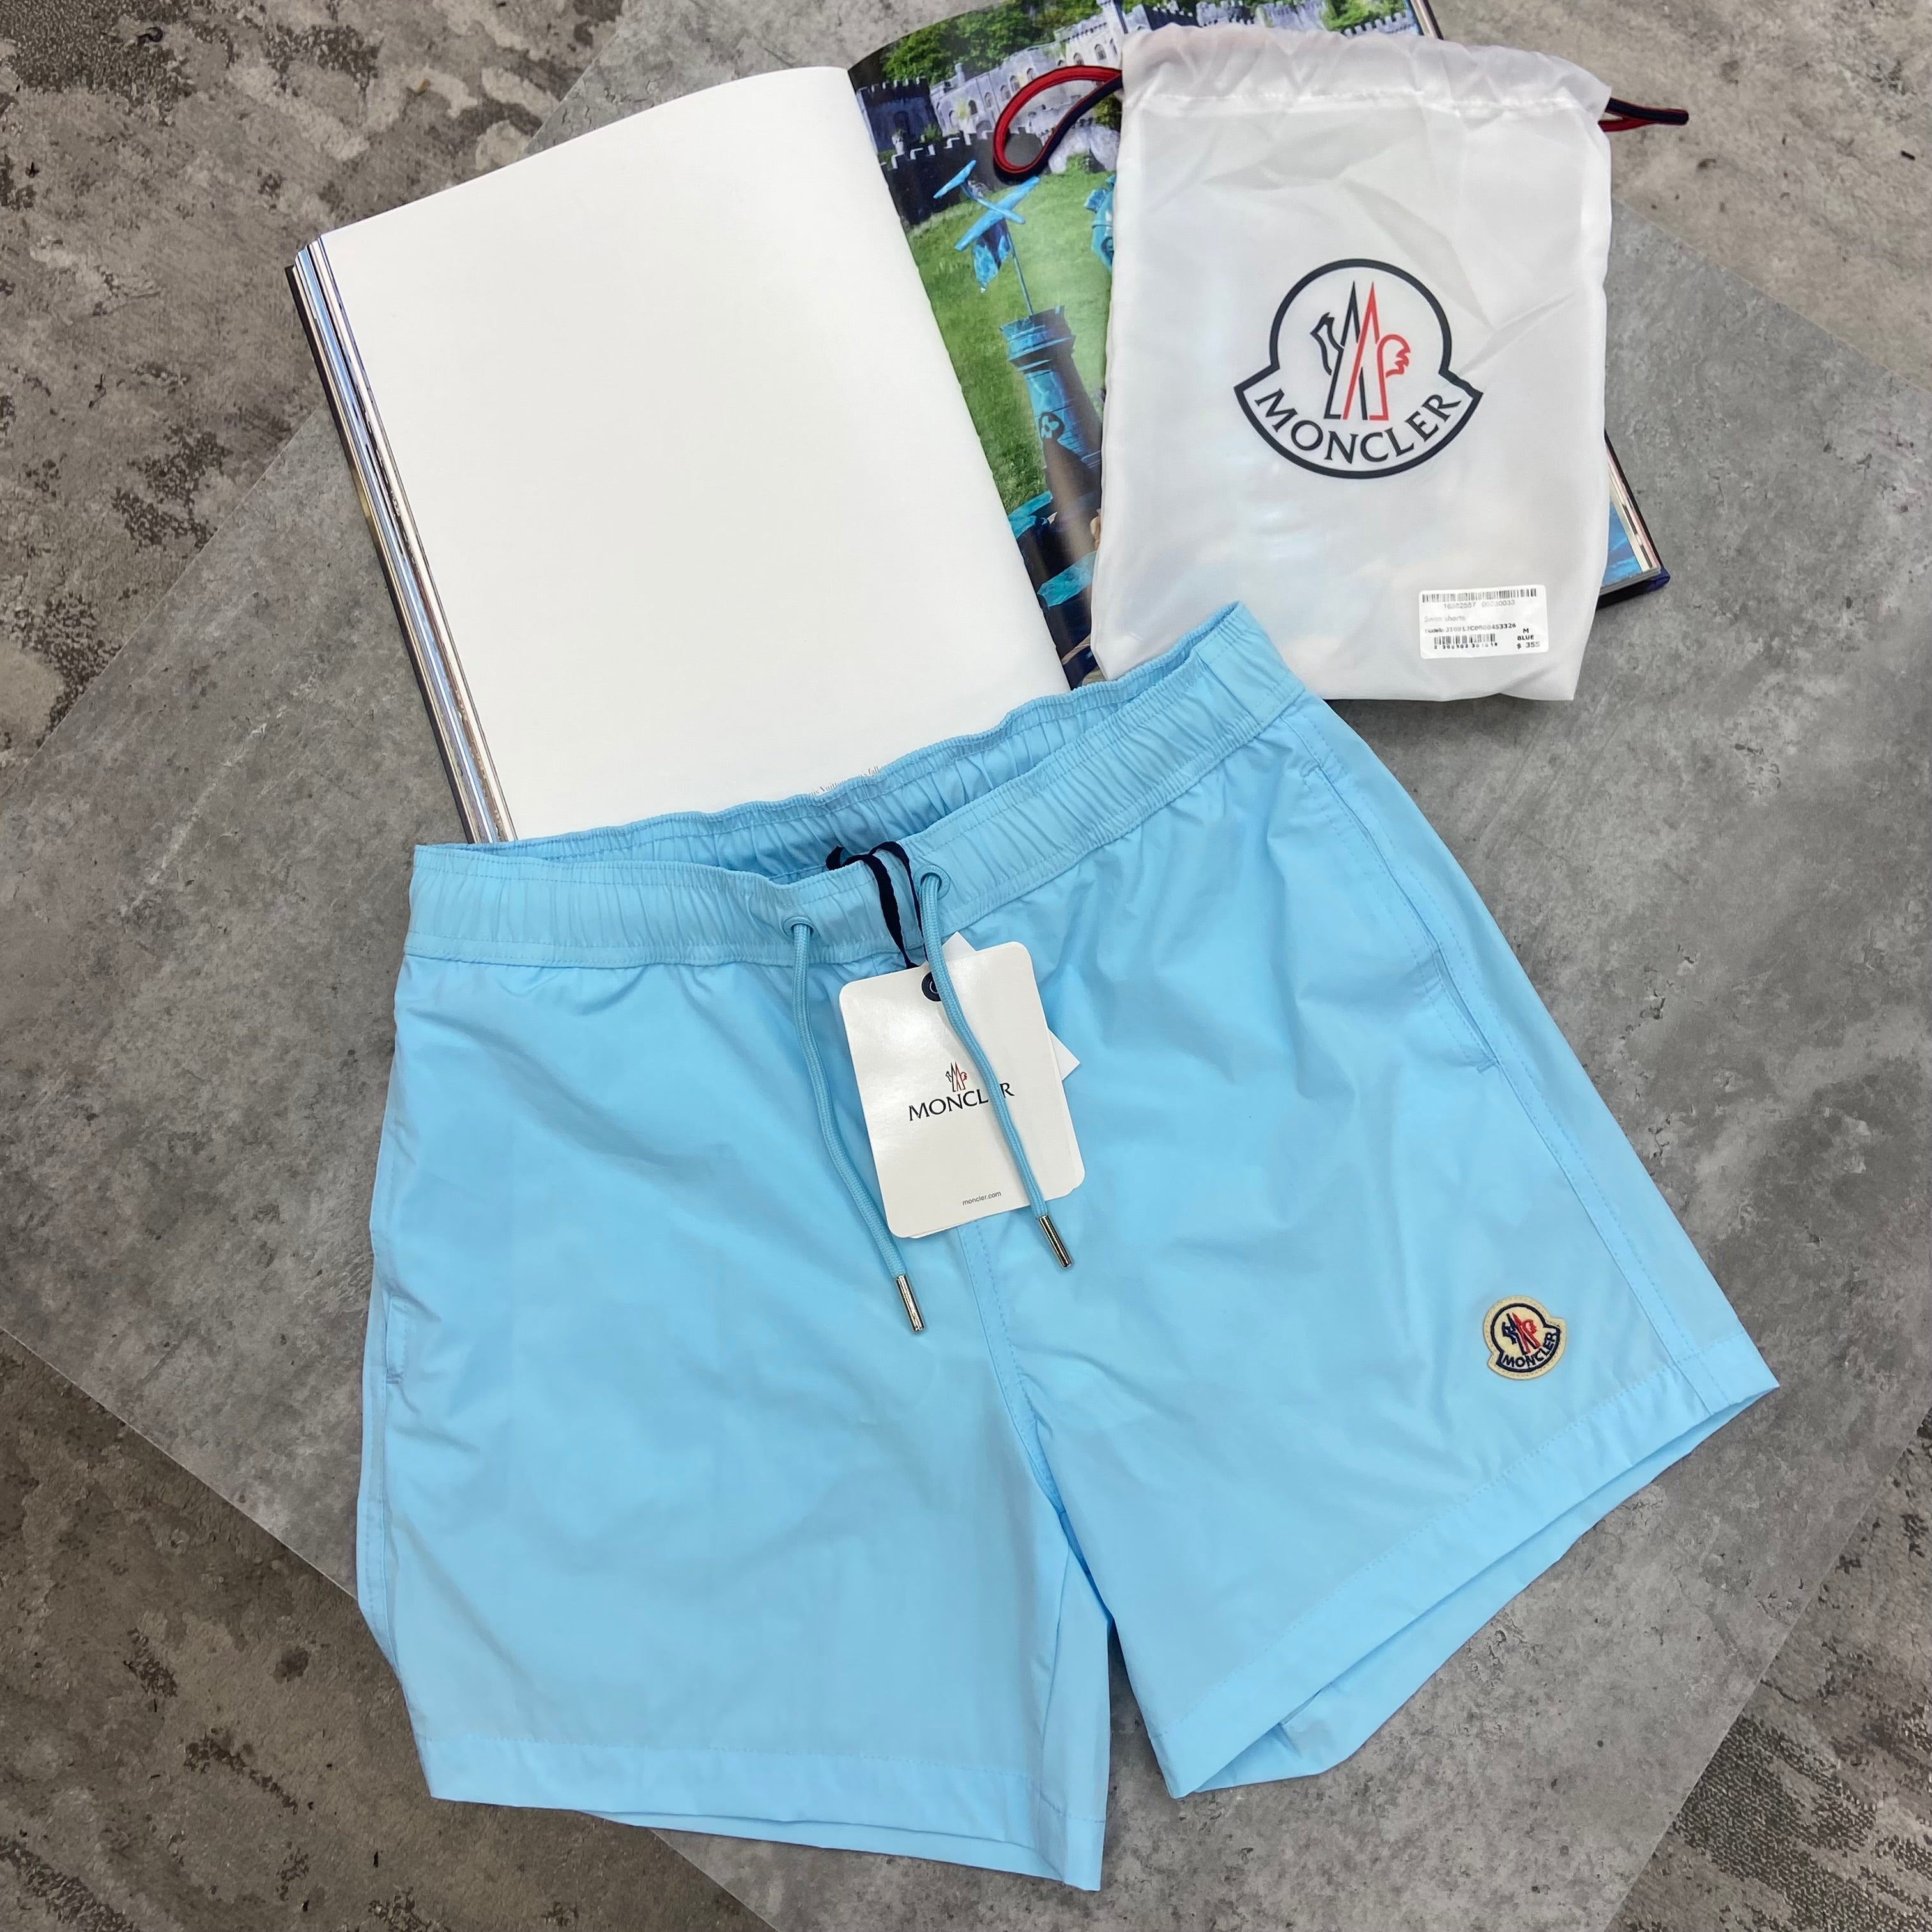 MONCLER - BAGGED SWIMS - SKY BLUE